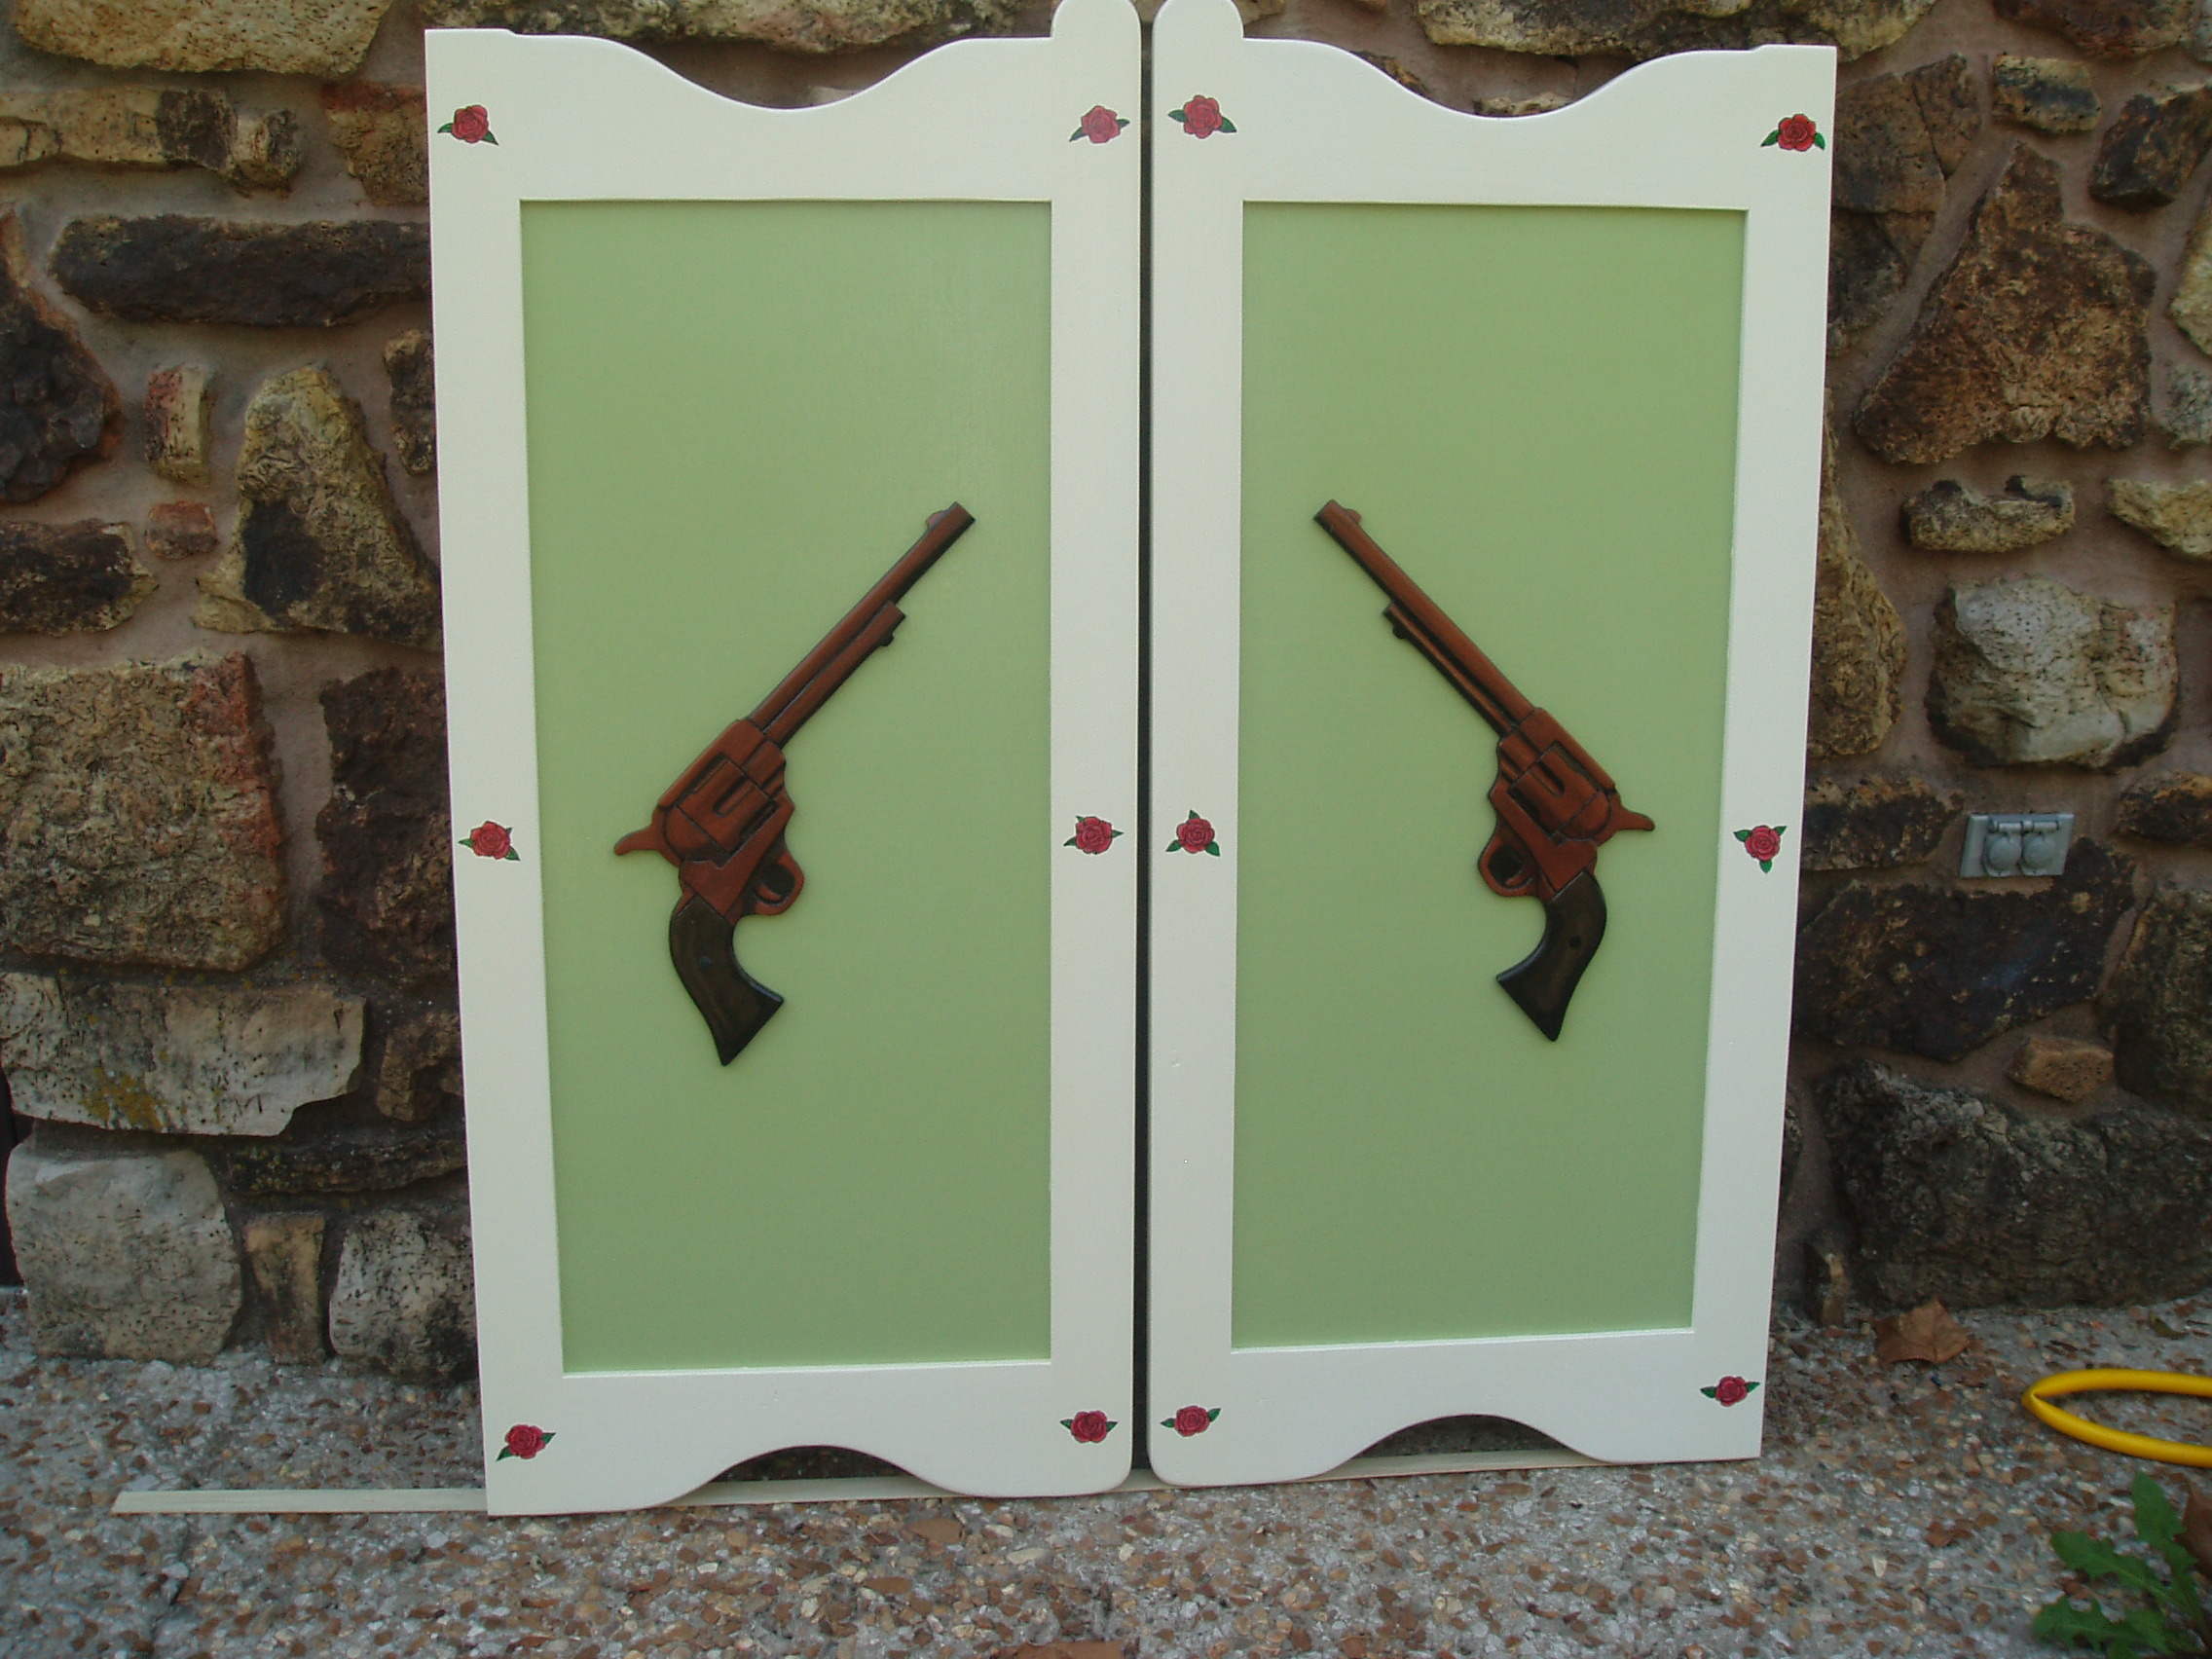 Painted western saloon doors with six shooter pistols